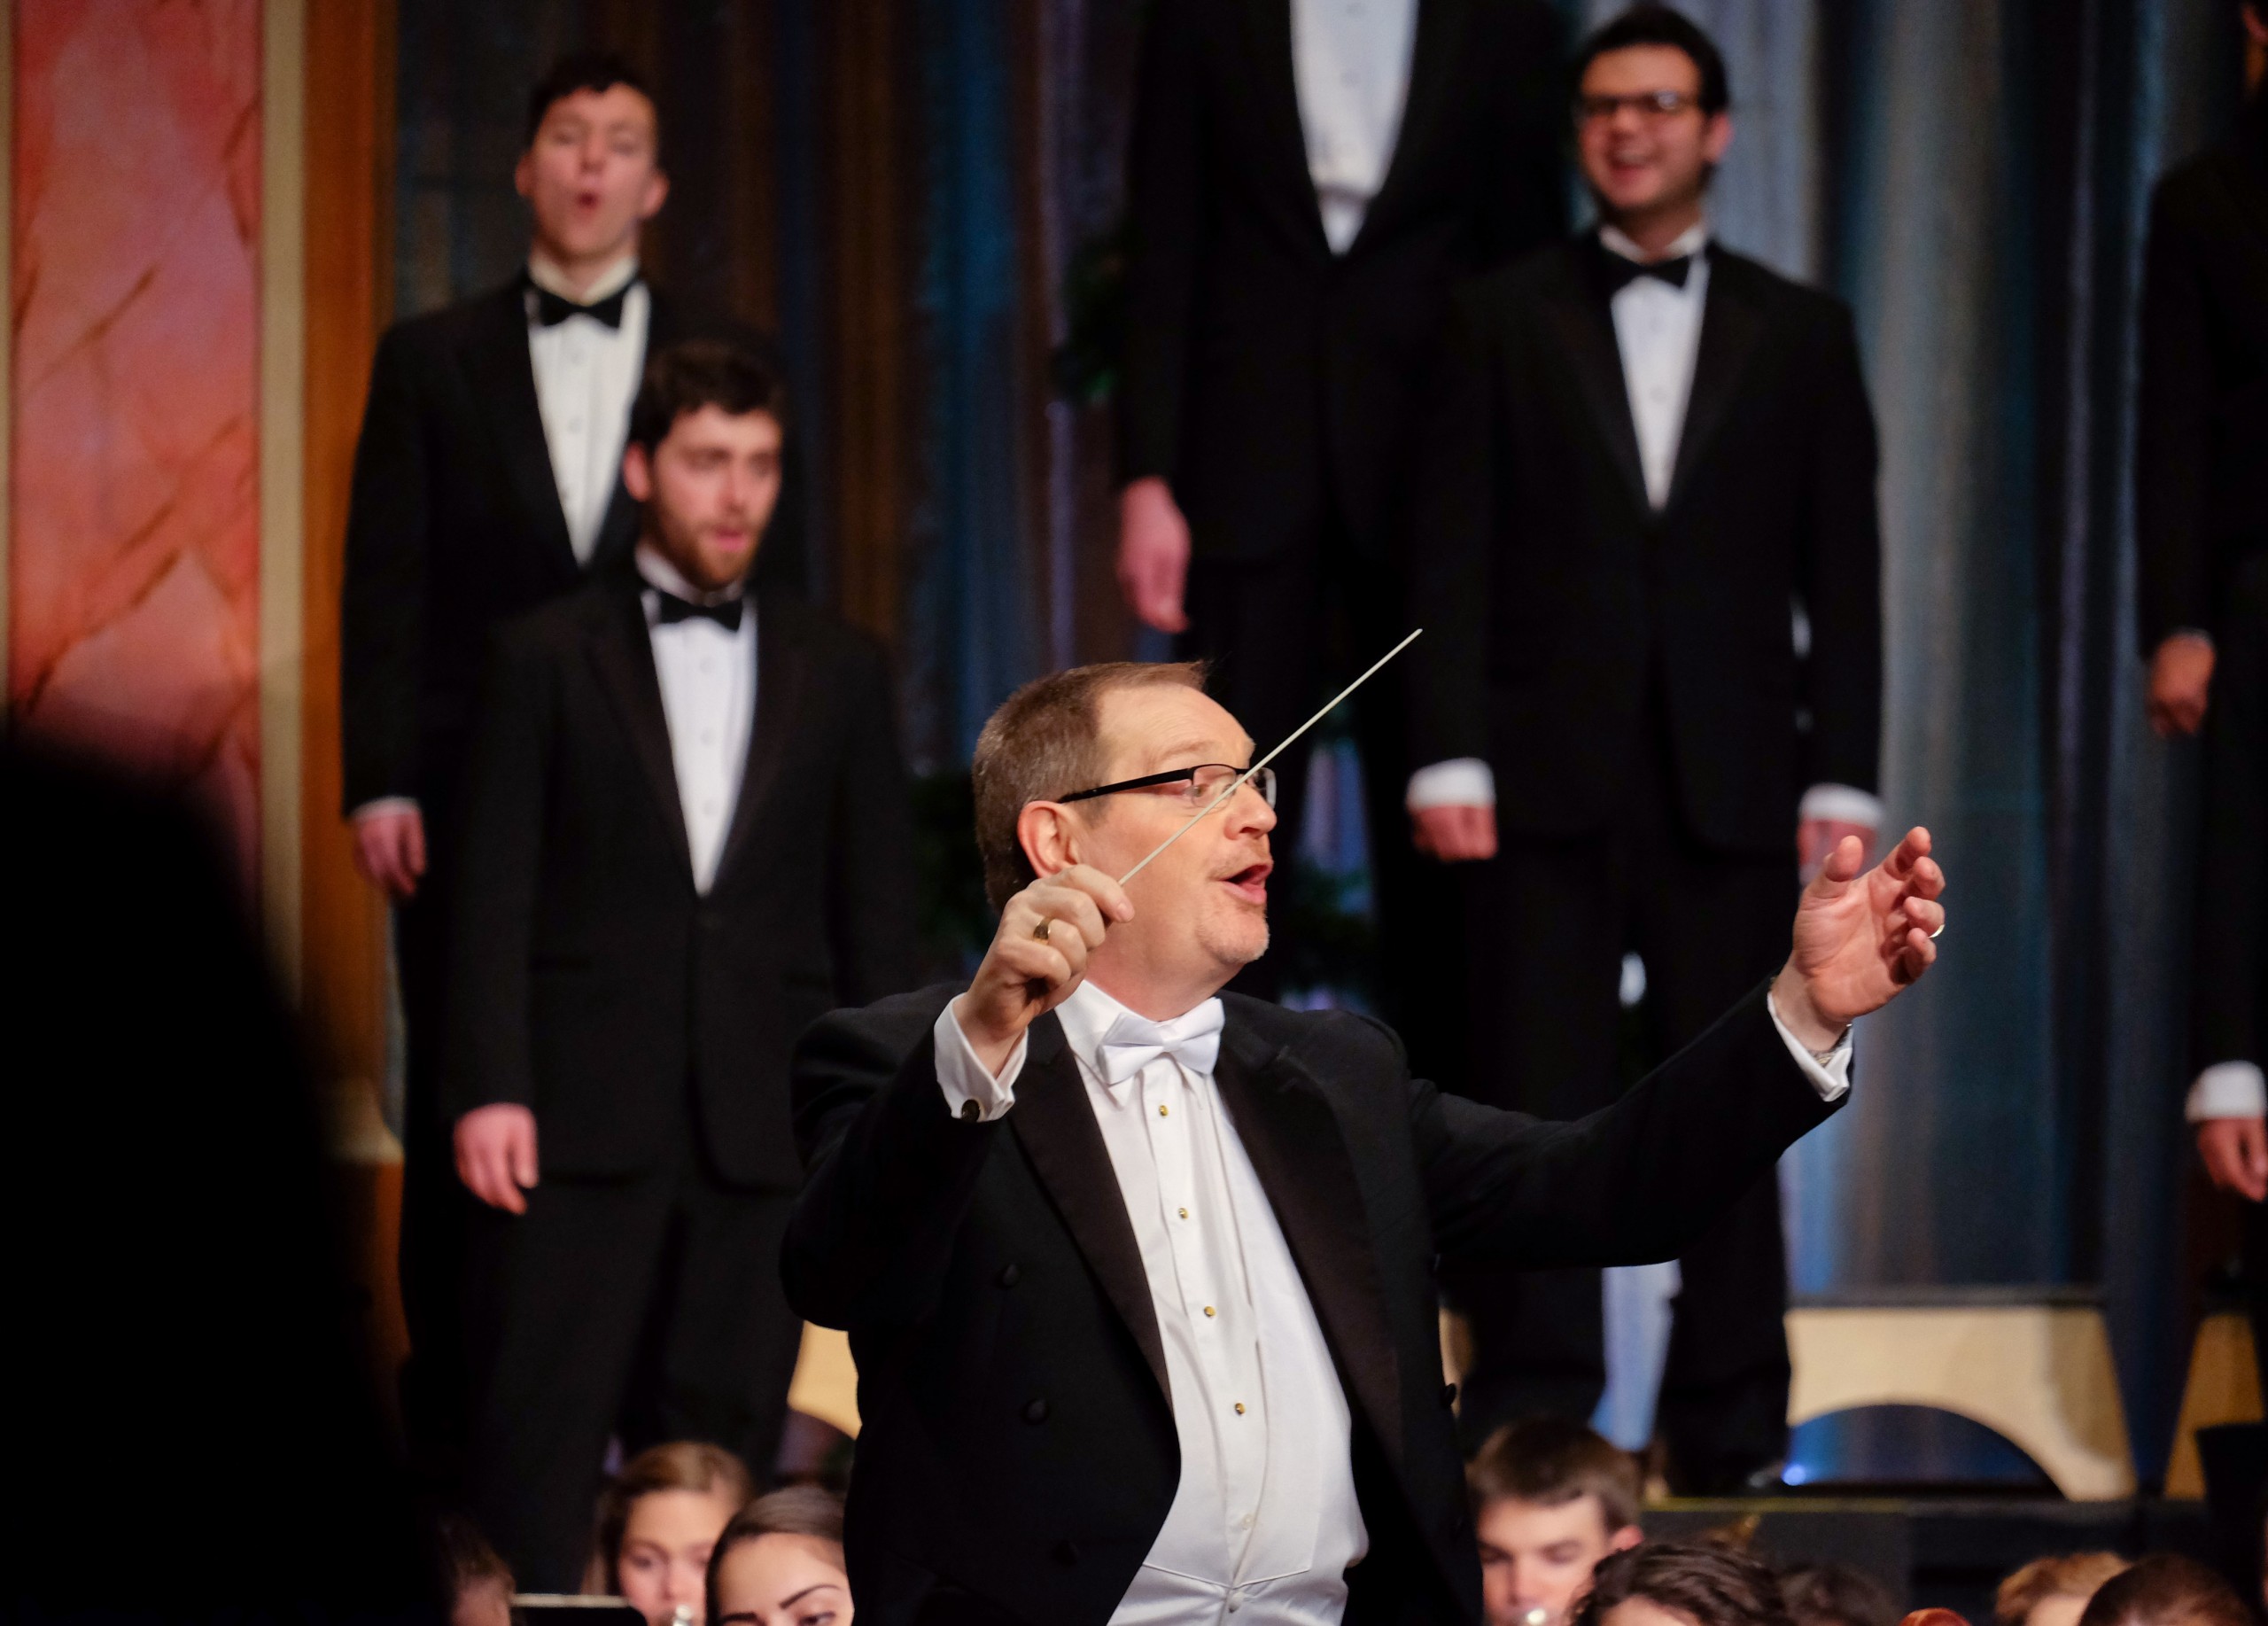 PLU Christmas featuring Angela Meade with the Choir of the West, the University Chorale and the University Orchestra Richard Nance conducting at PLU on Friday, Dec. 11, 2015. (Photo: John Froschauer/PLU)